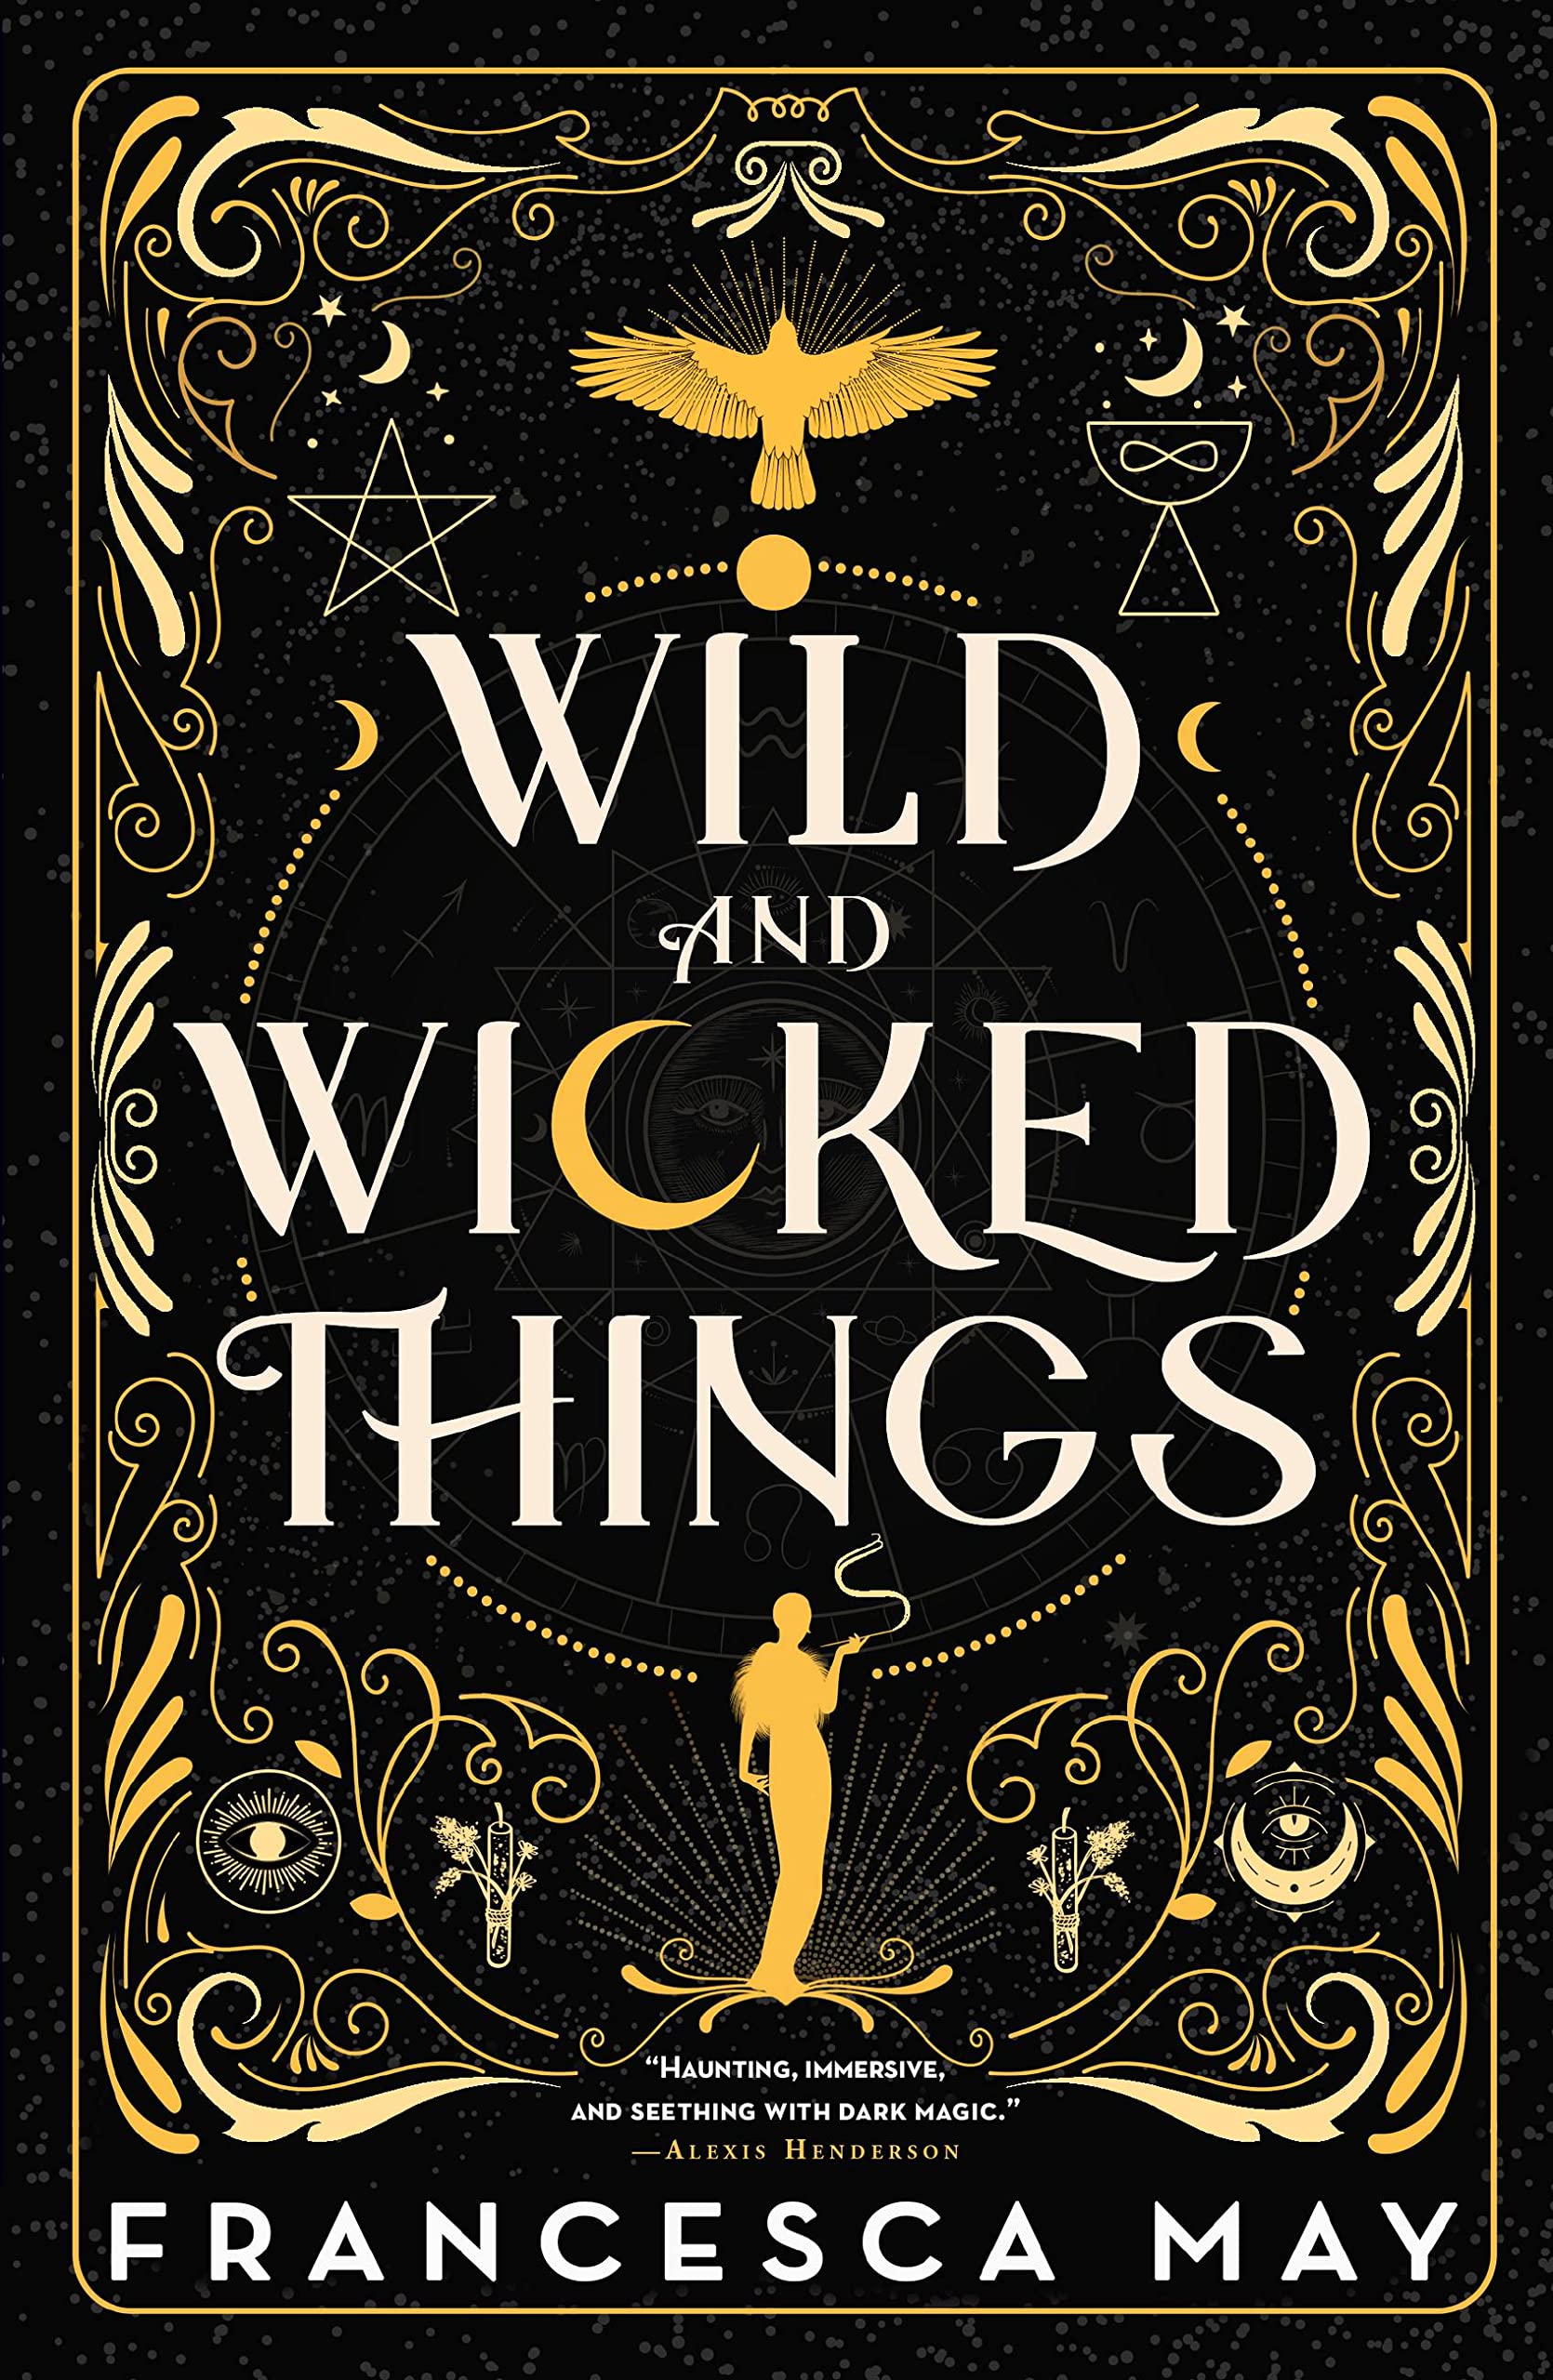 Cover of “Wild and Wicked Things” by Francesca May